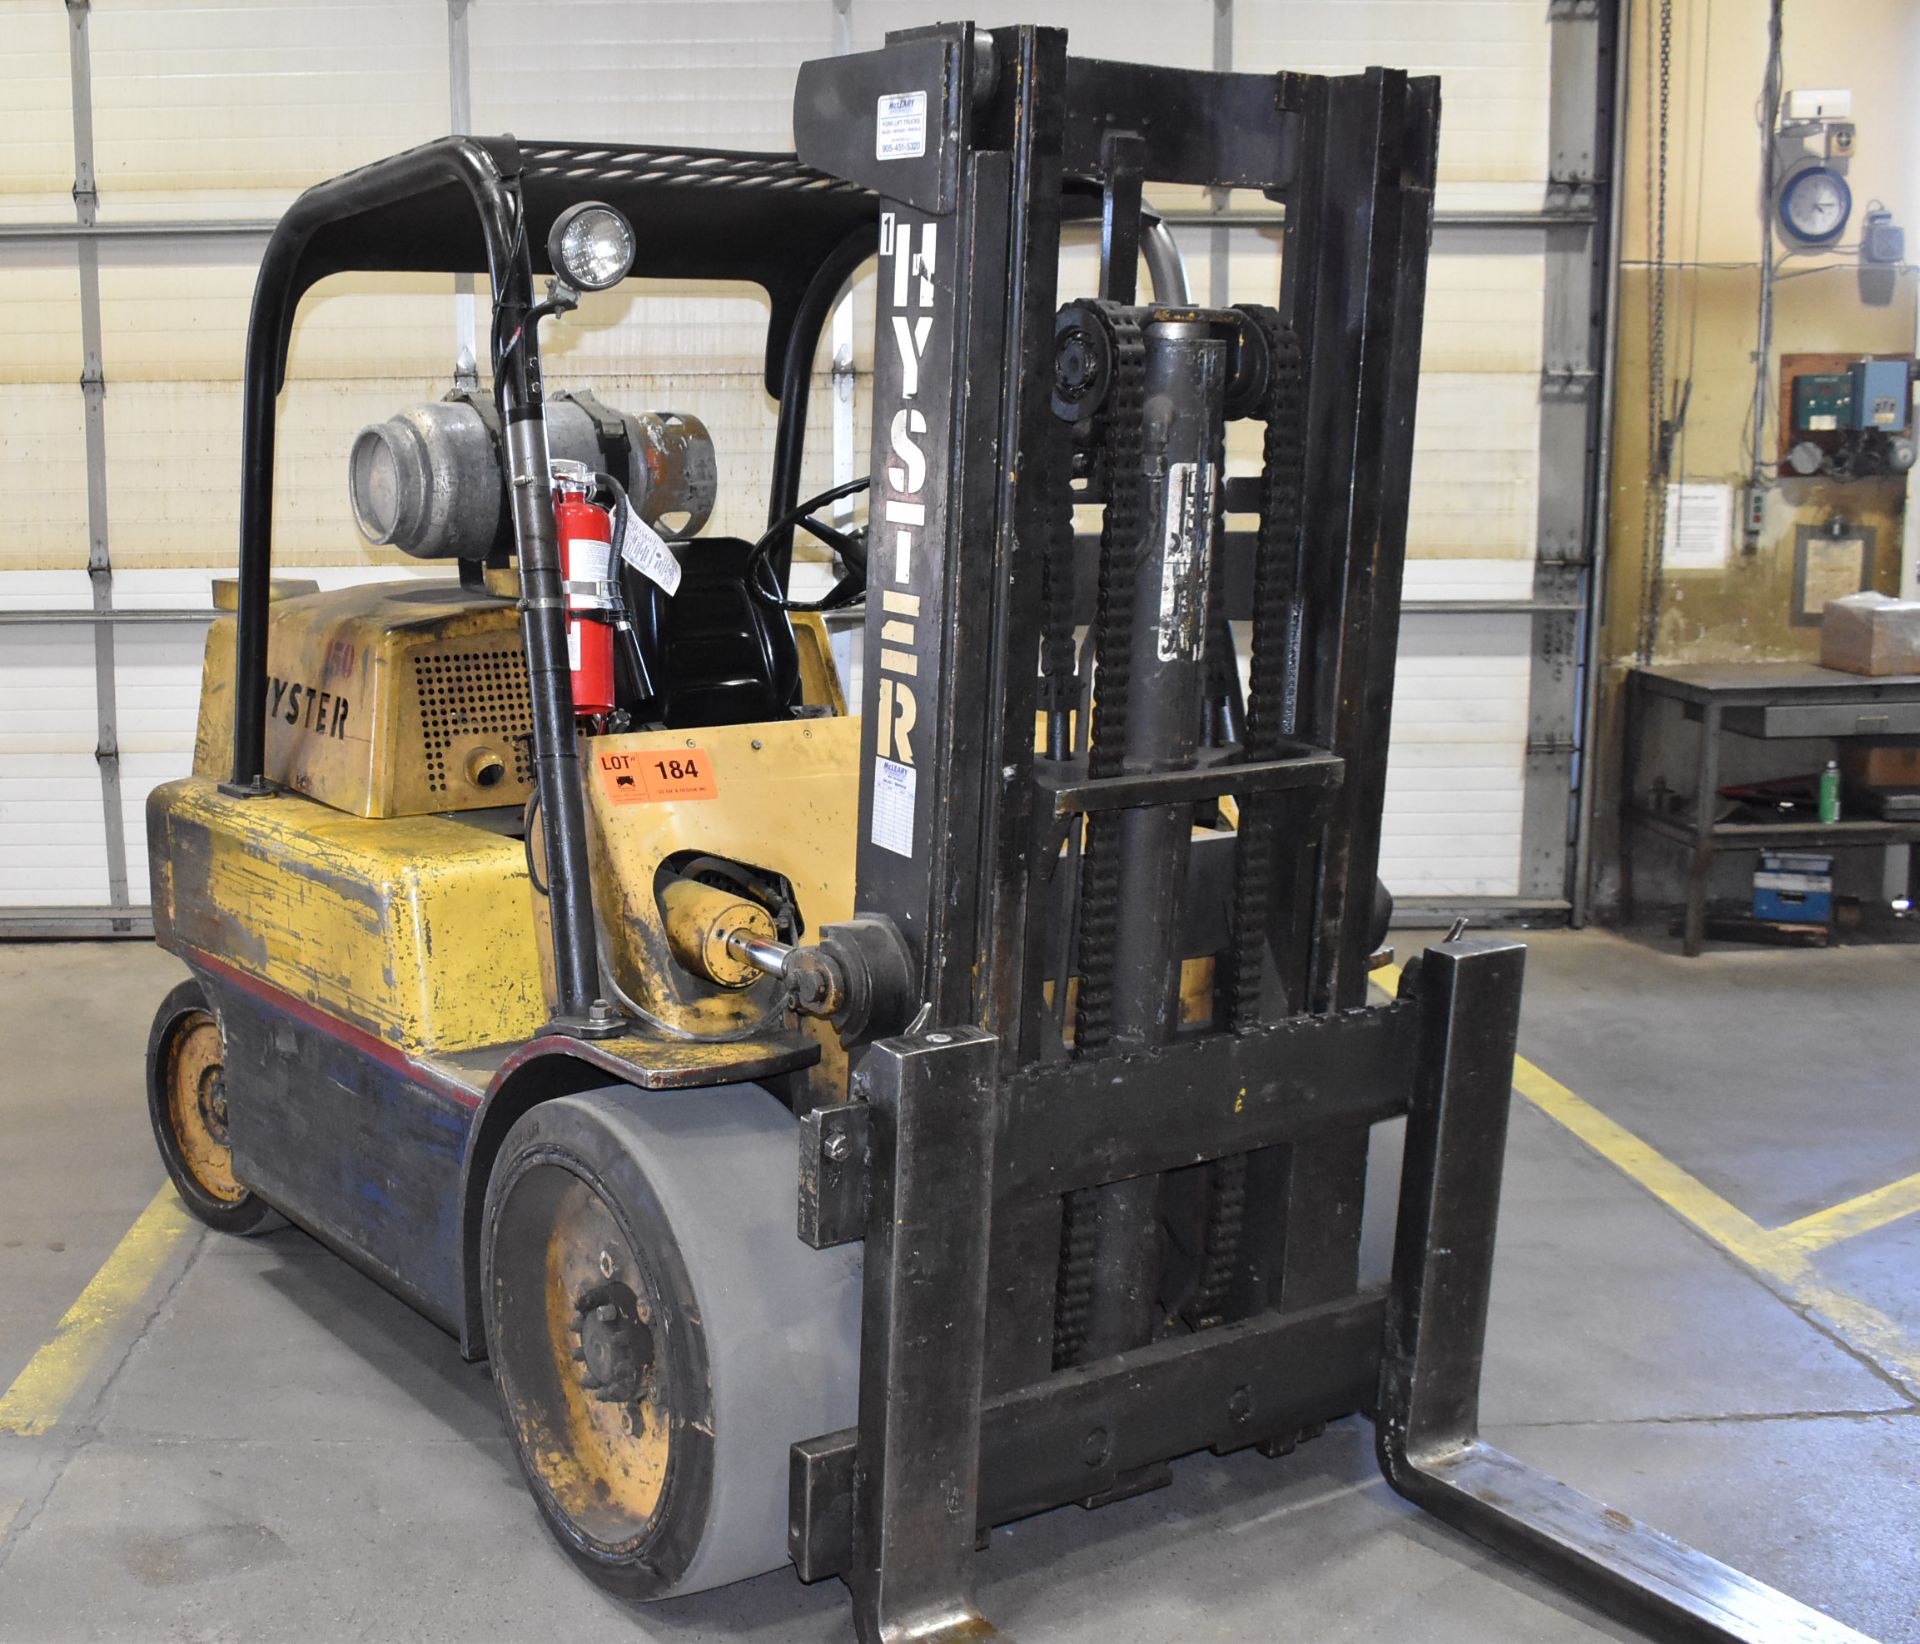 HYSTER S150A 15,000 LB. CAPACITY LPG FORKLIFT WITH 129" MAX. LIFT HEIGHT, 2-STAGE MAST, SOLID TIRES, - Image 3 of 18